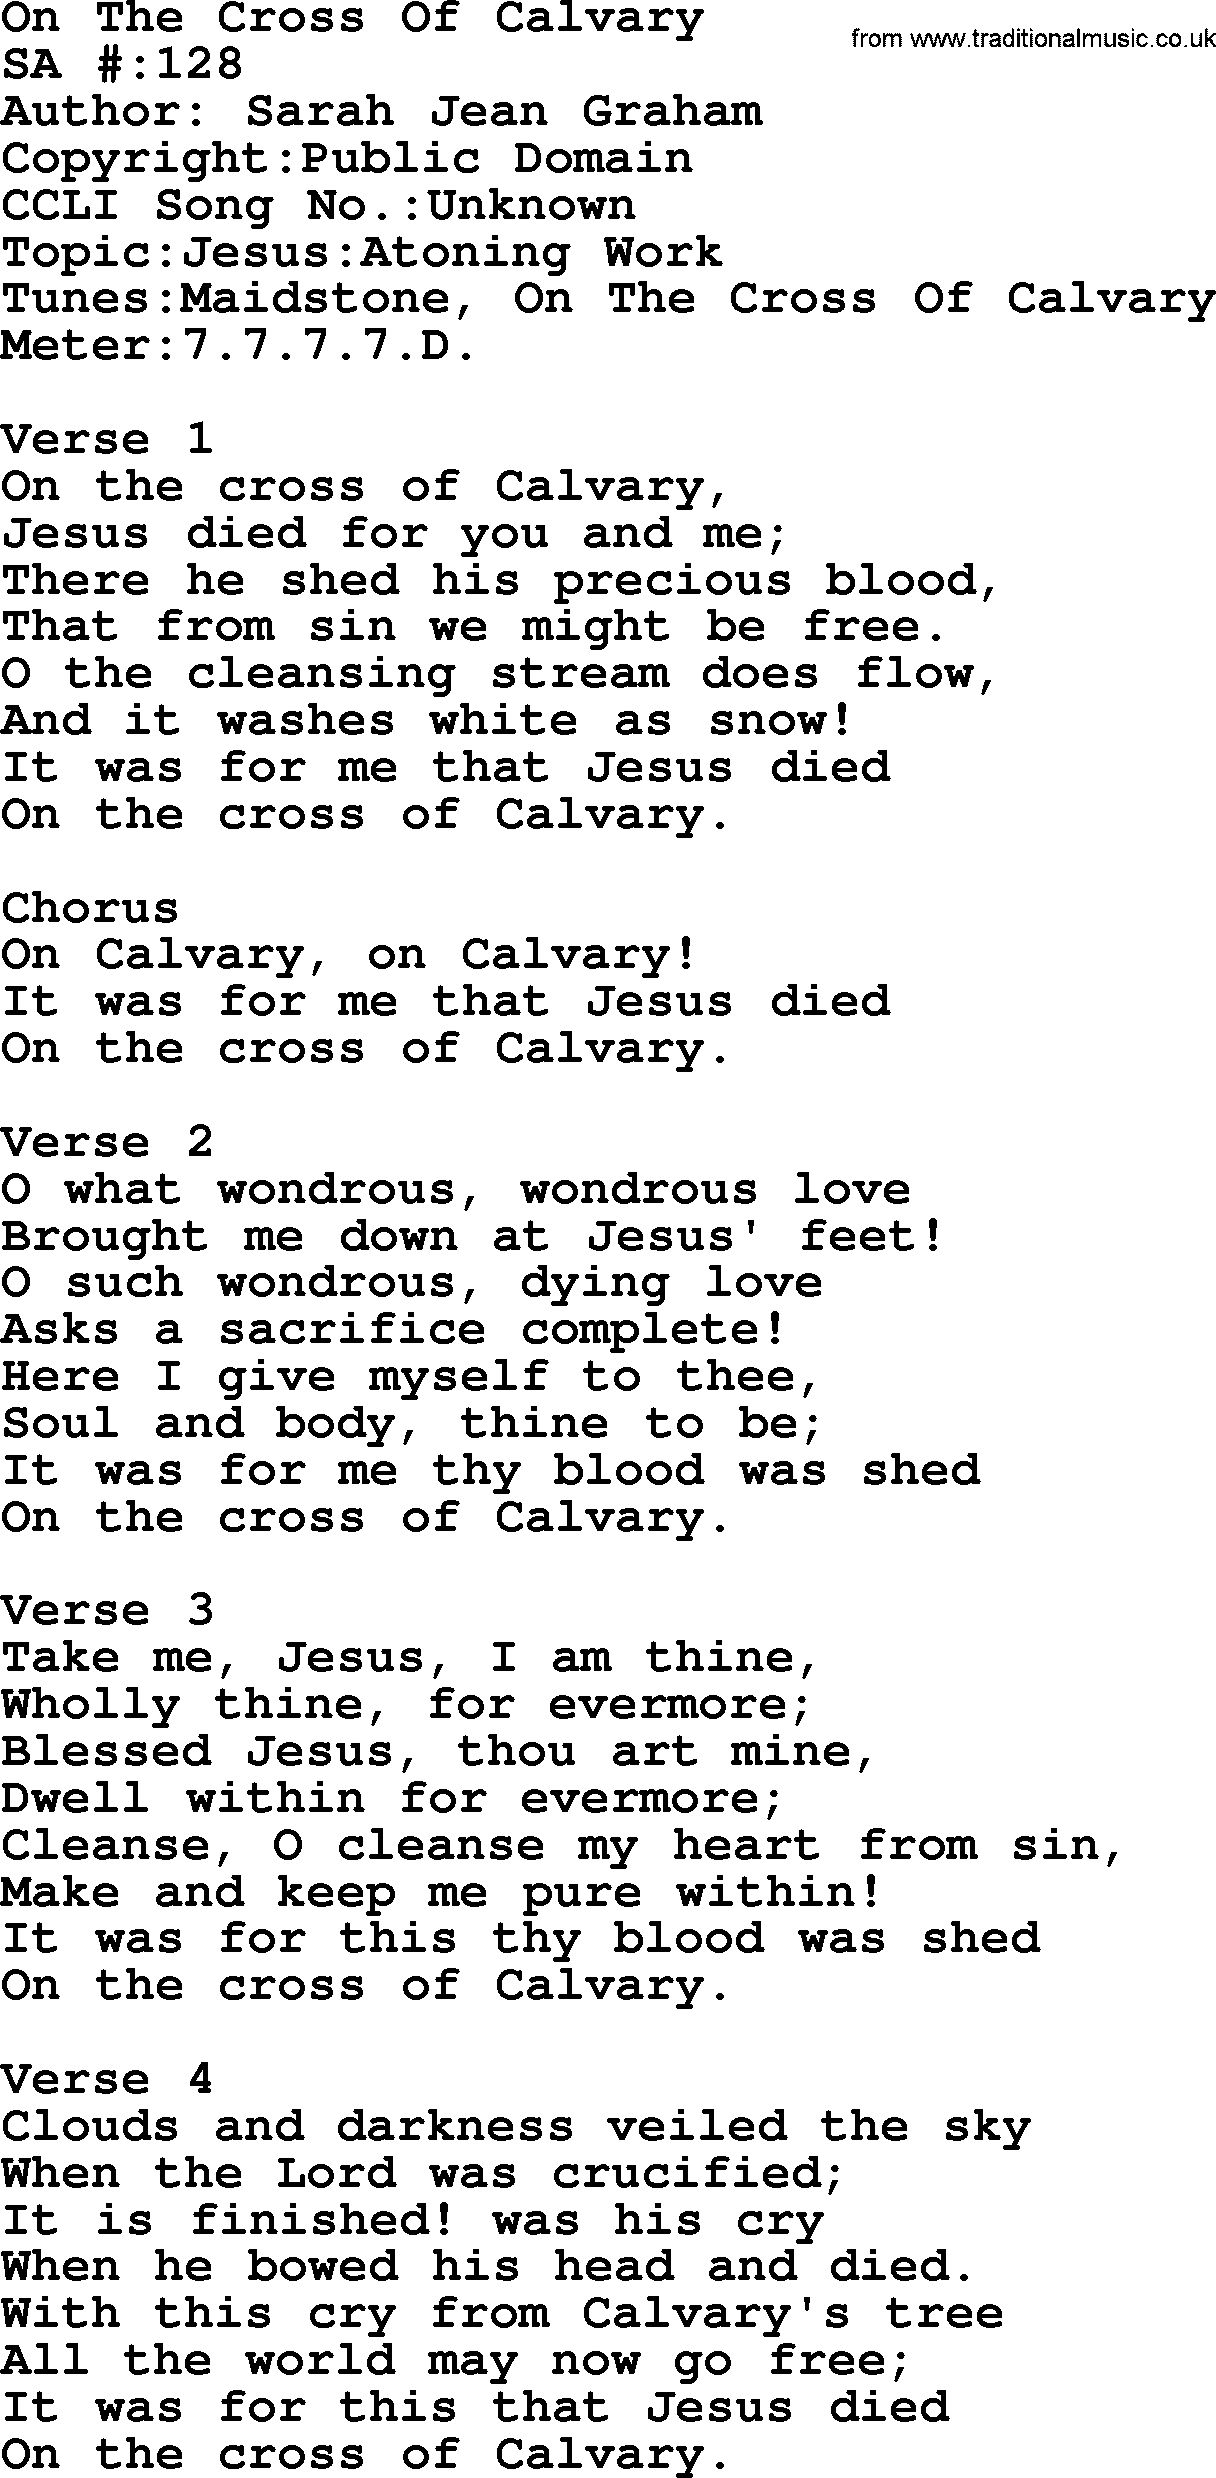 Salvation Army Hymnal, title: On The Cross Of Calvary, with lyrics and PDF,